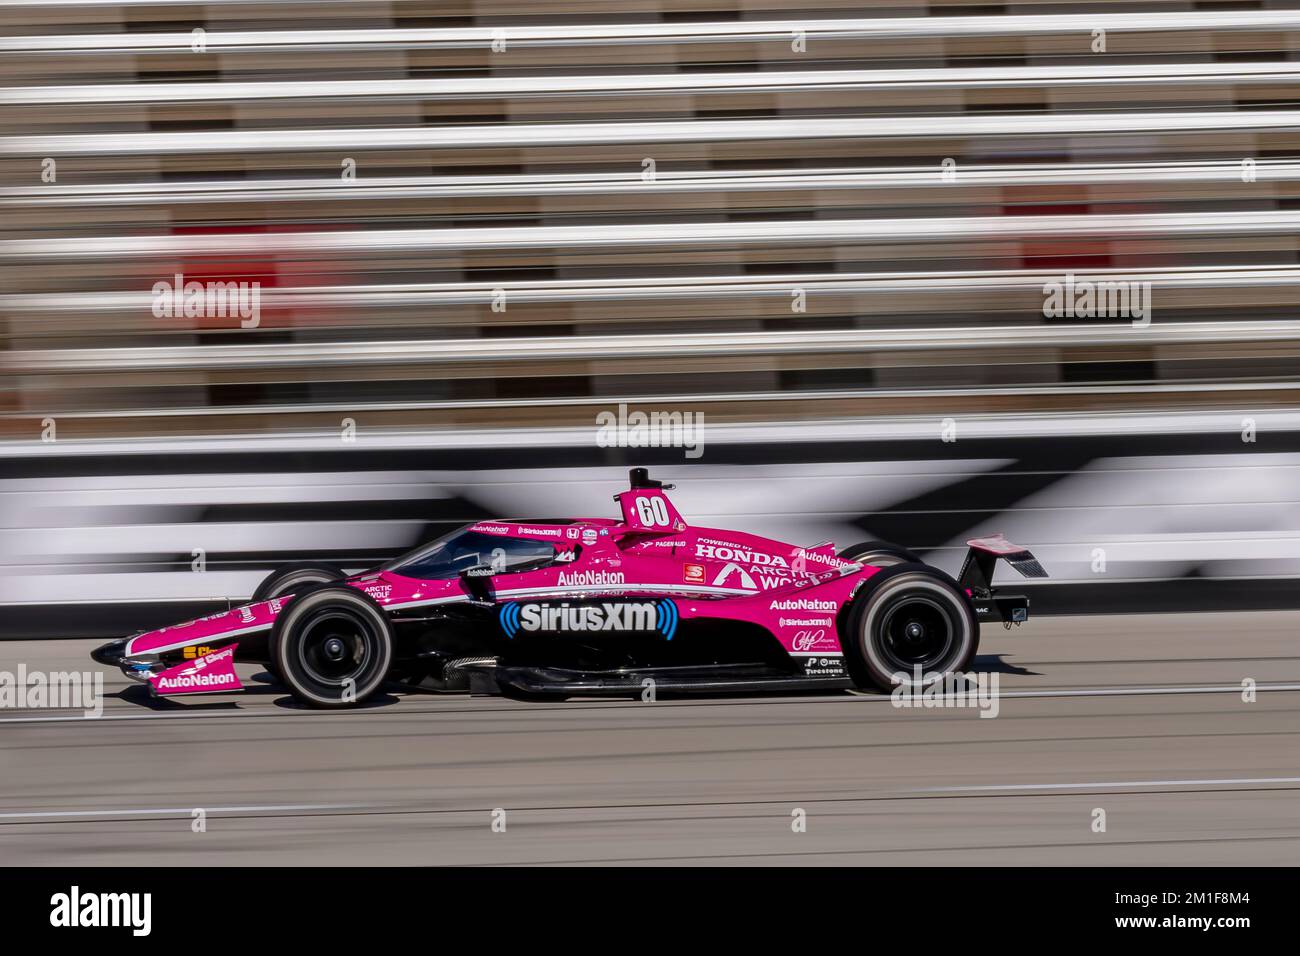 SIMON PAGENAUD (60) of Montmorillon, France comes through the front stretch during a practice session for the XPEL 375 at Texas Motor Speedway in Ft. Worth Texas. Stock Photo